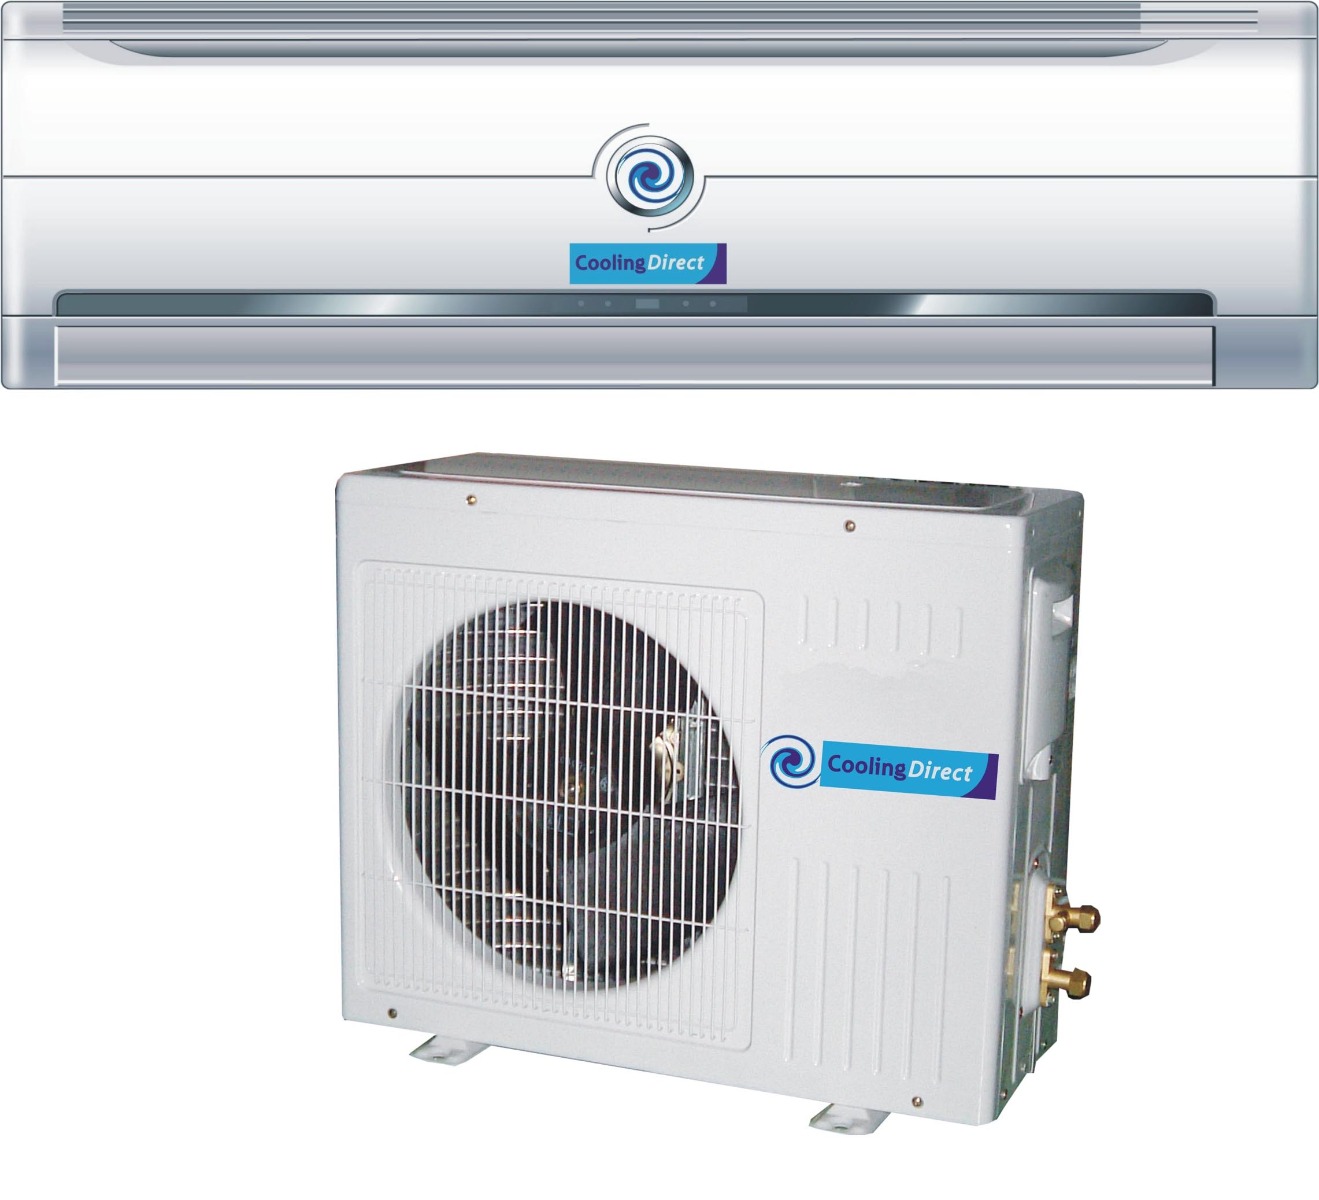 wall mounted split air conditioner, one of many air conditioning types